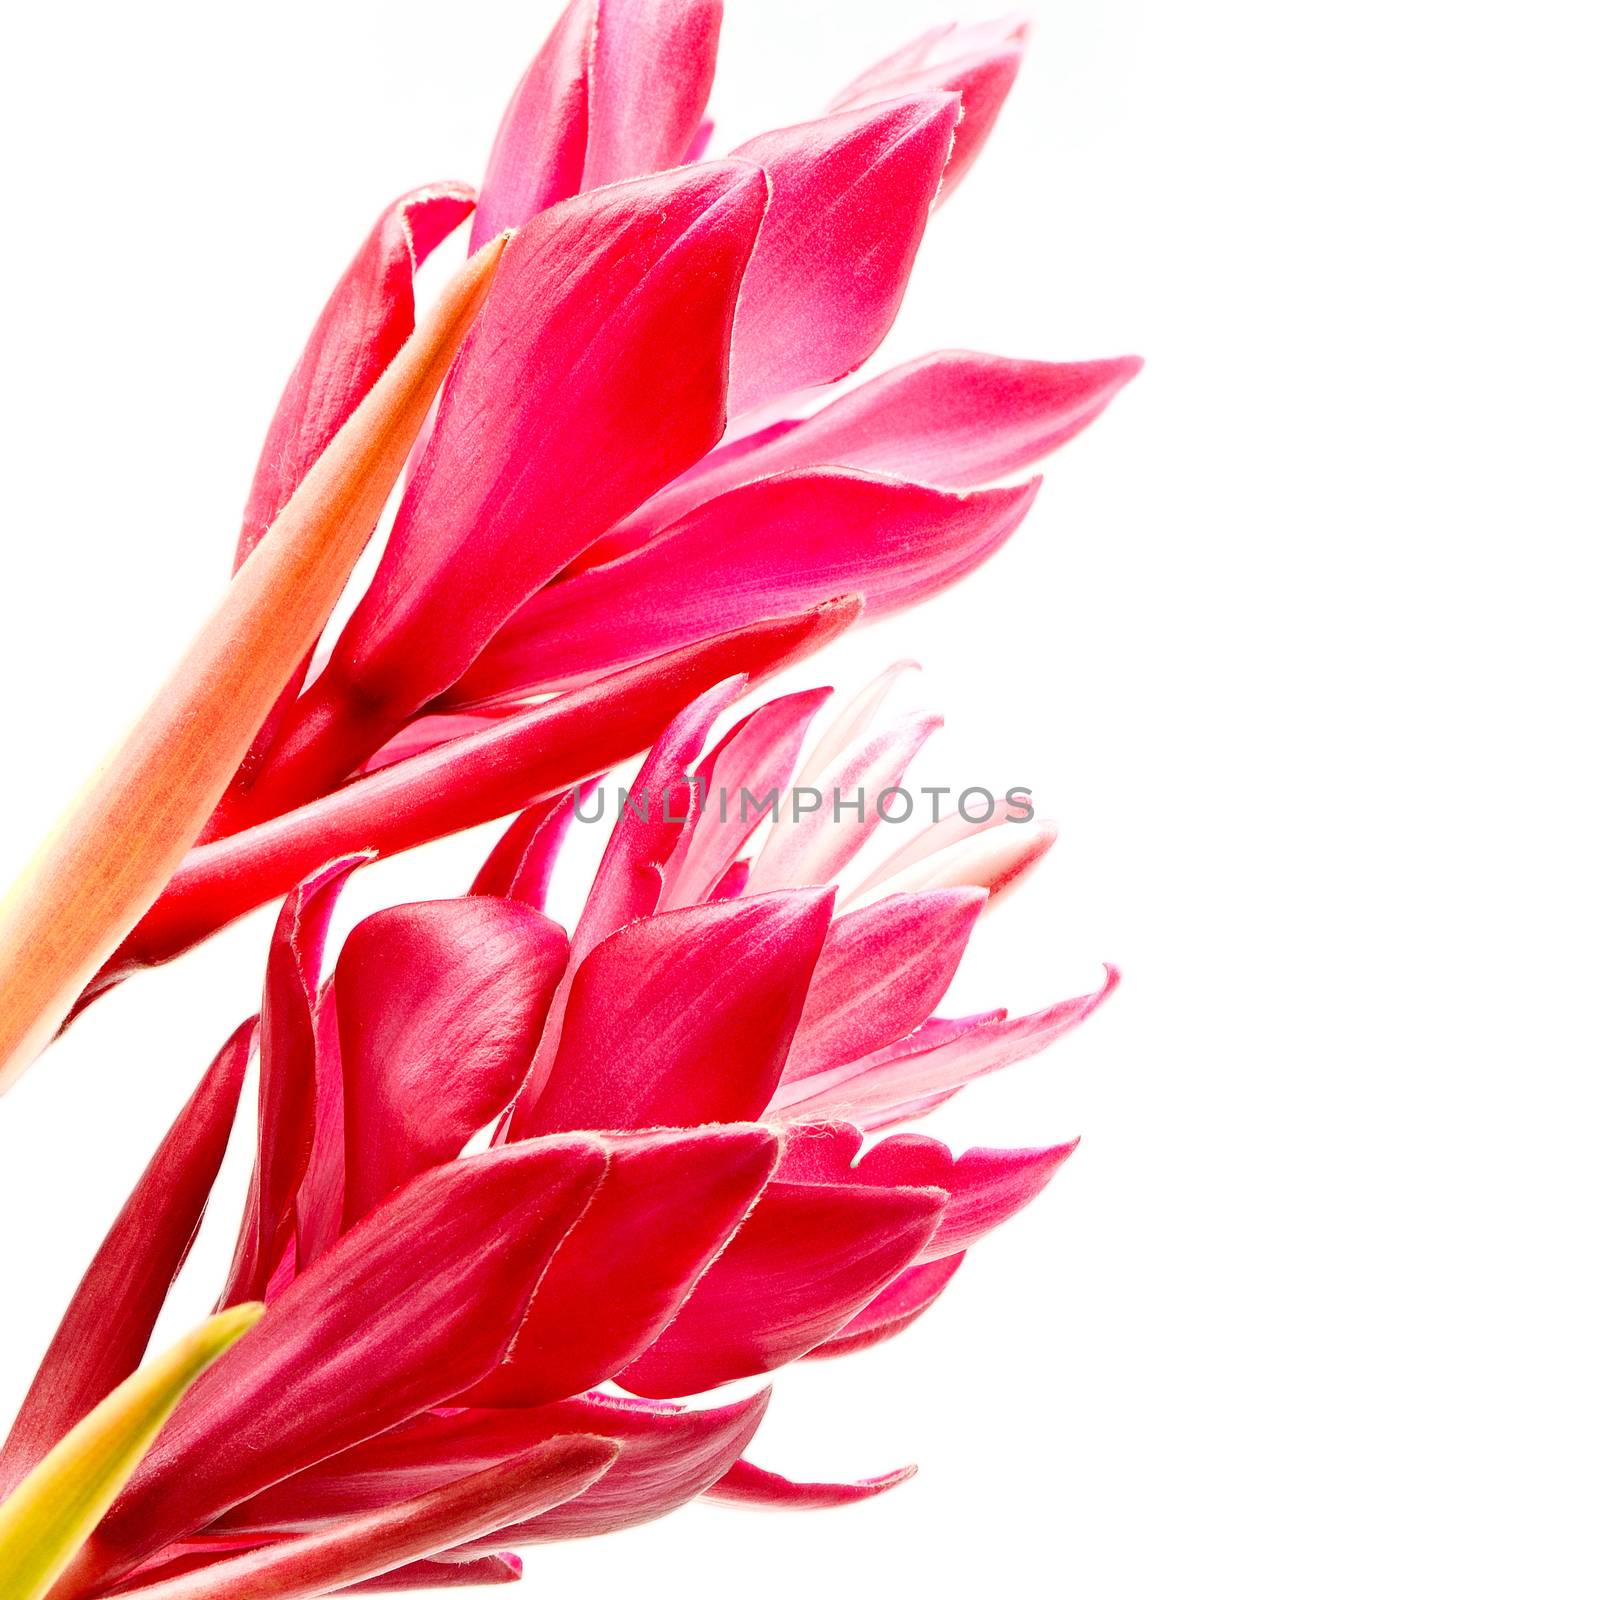 Colorful flower, Red Ginger or Ostrich Plume (Alpinia purpurata) isolated on a white background